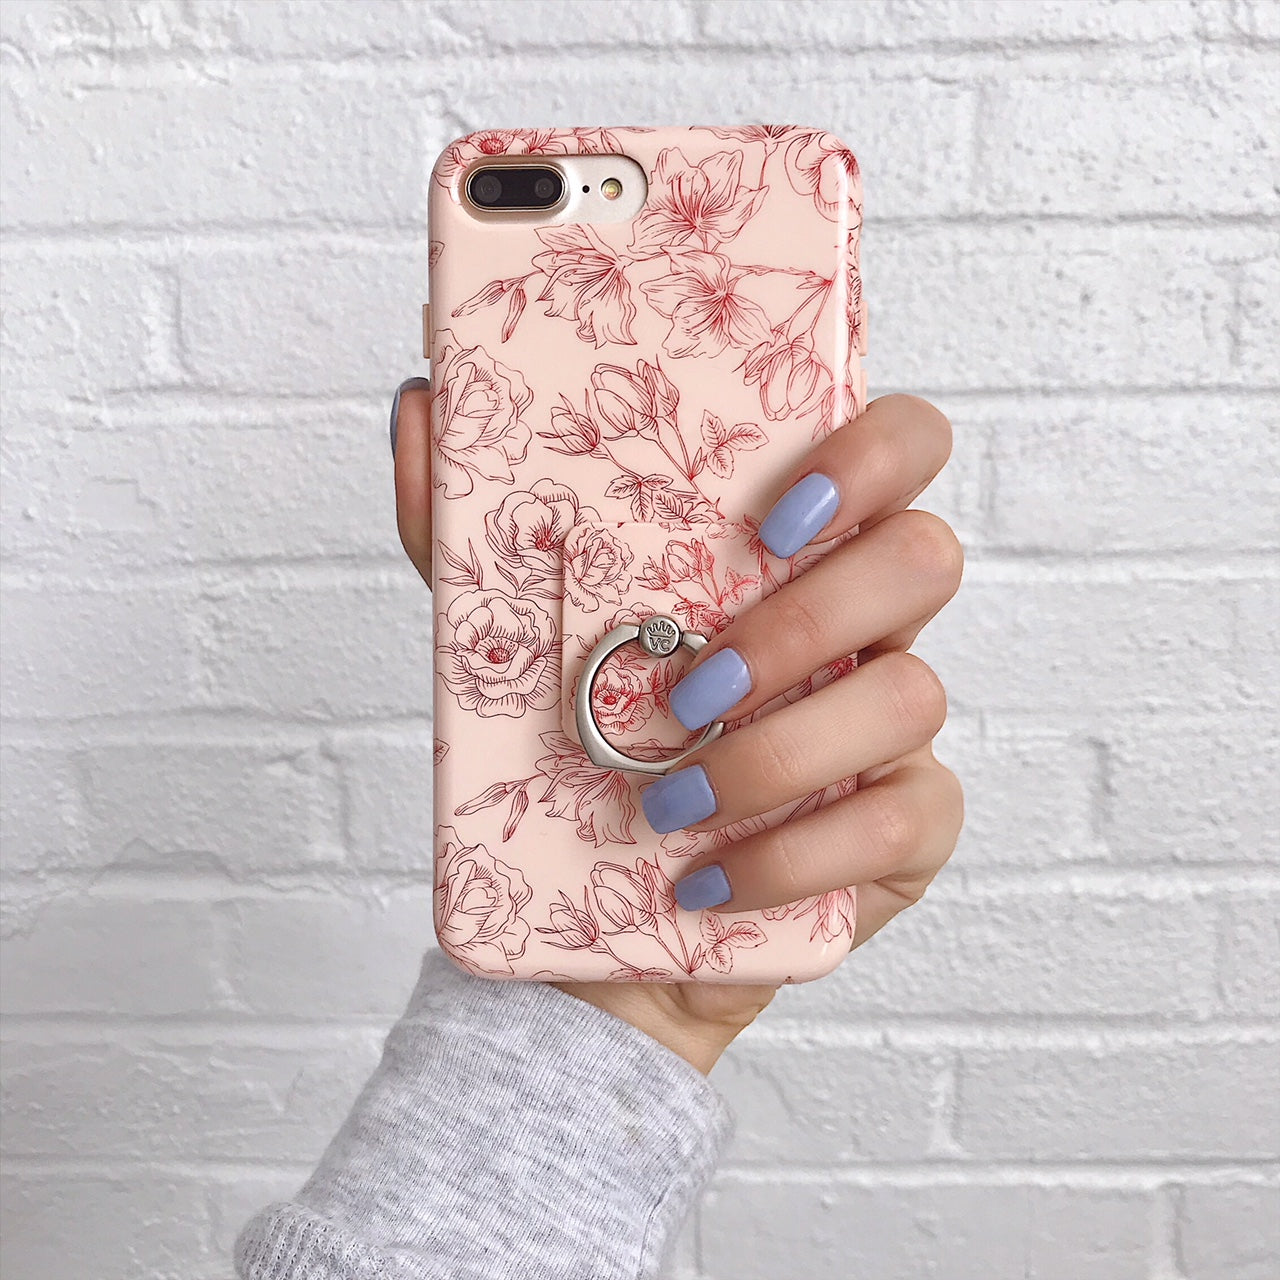 Nude Red Chrome Floral Phone Ring